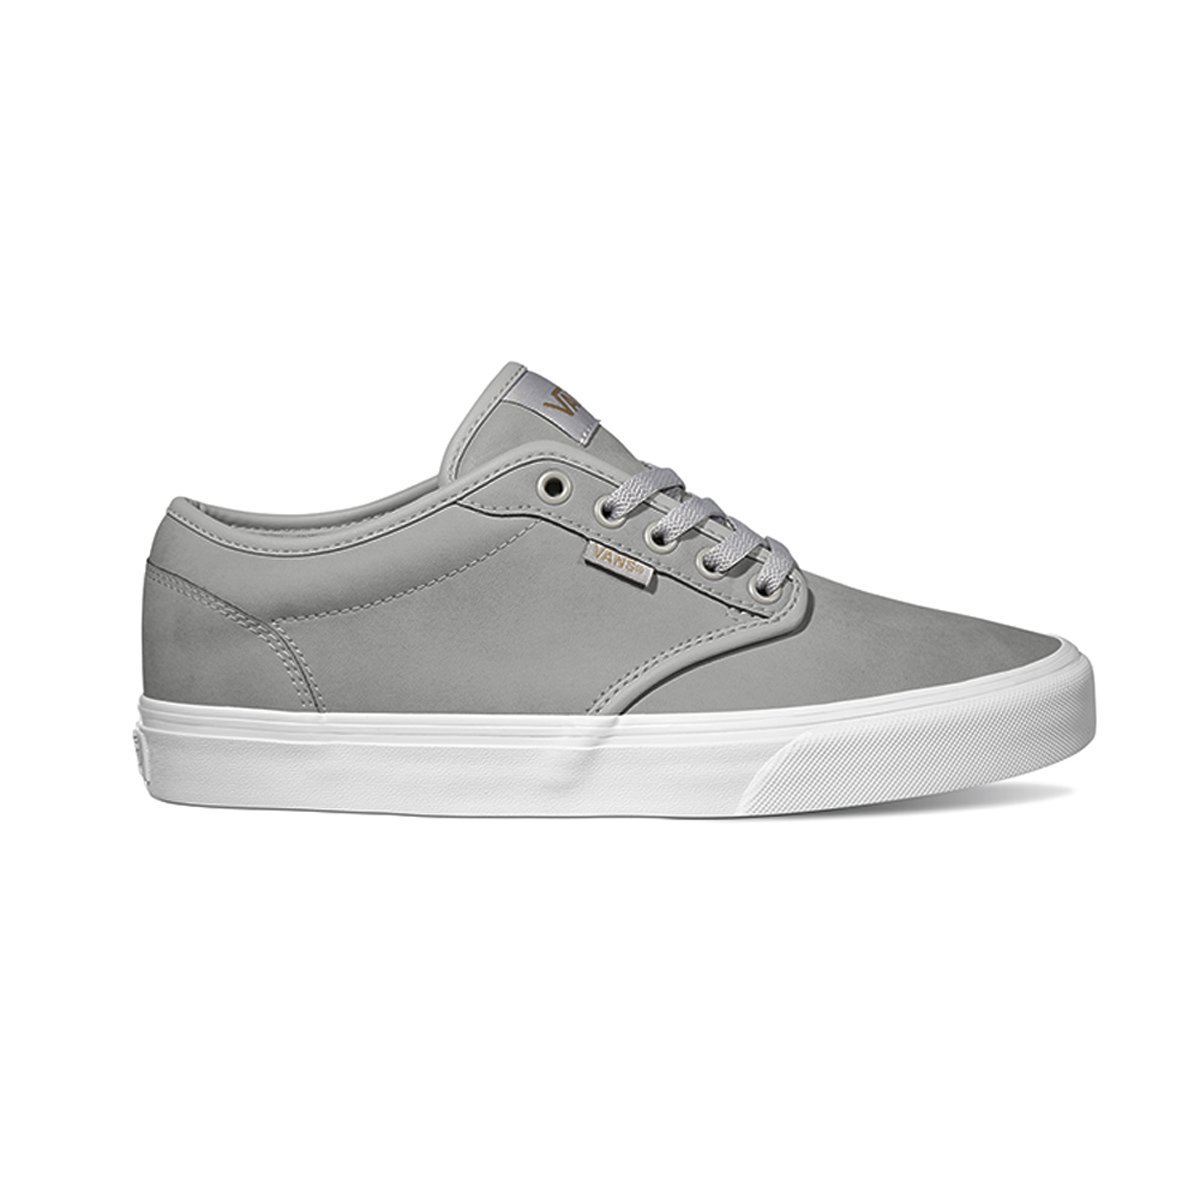 Calzado Casual Atwood Leather Vans - Caballero